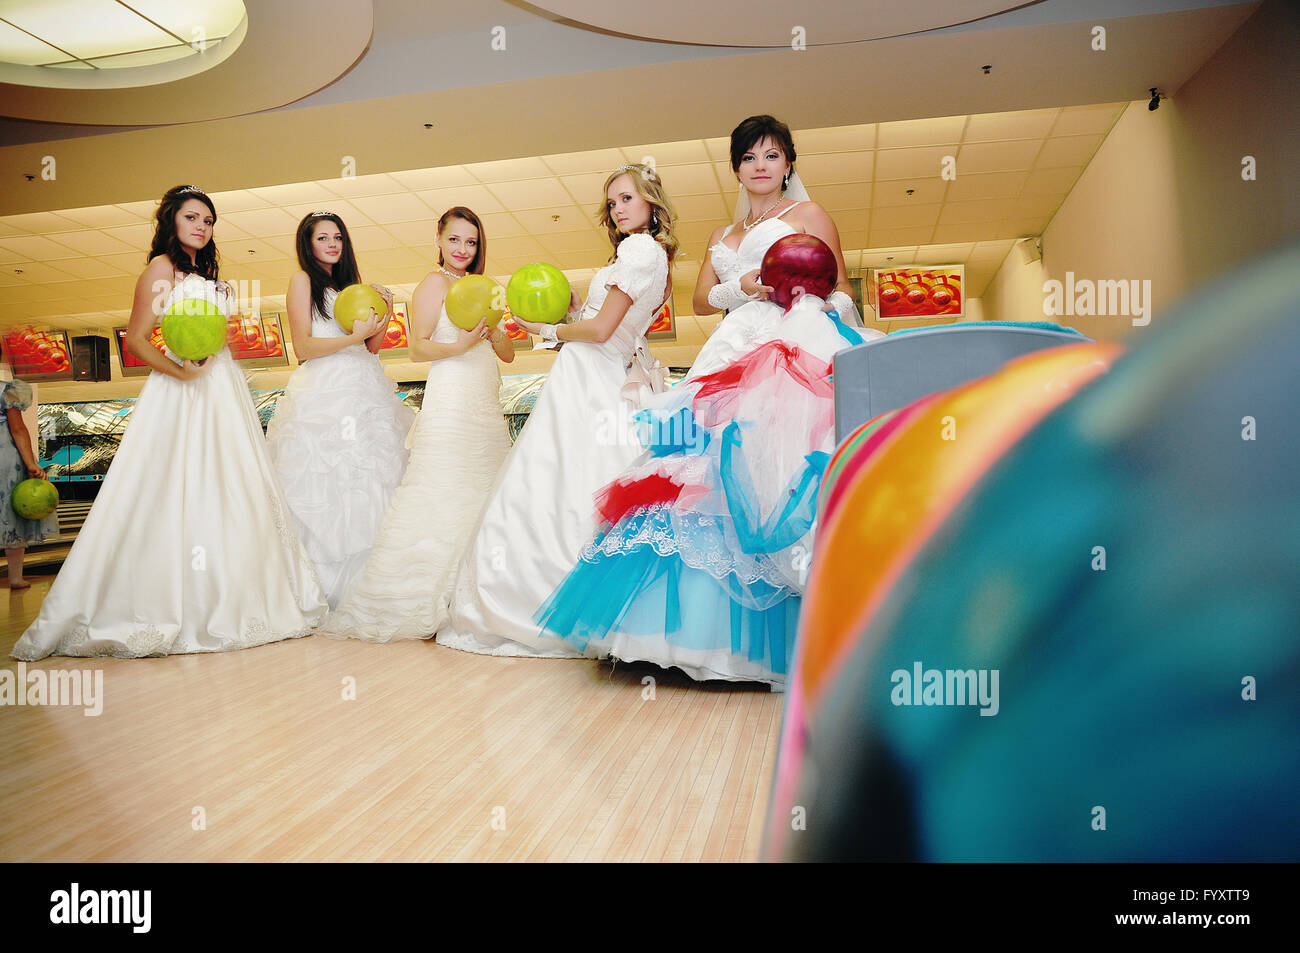 funny brides  on the bowling club Stock Photo